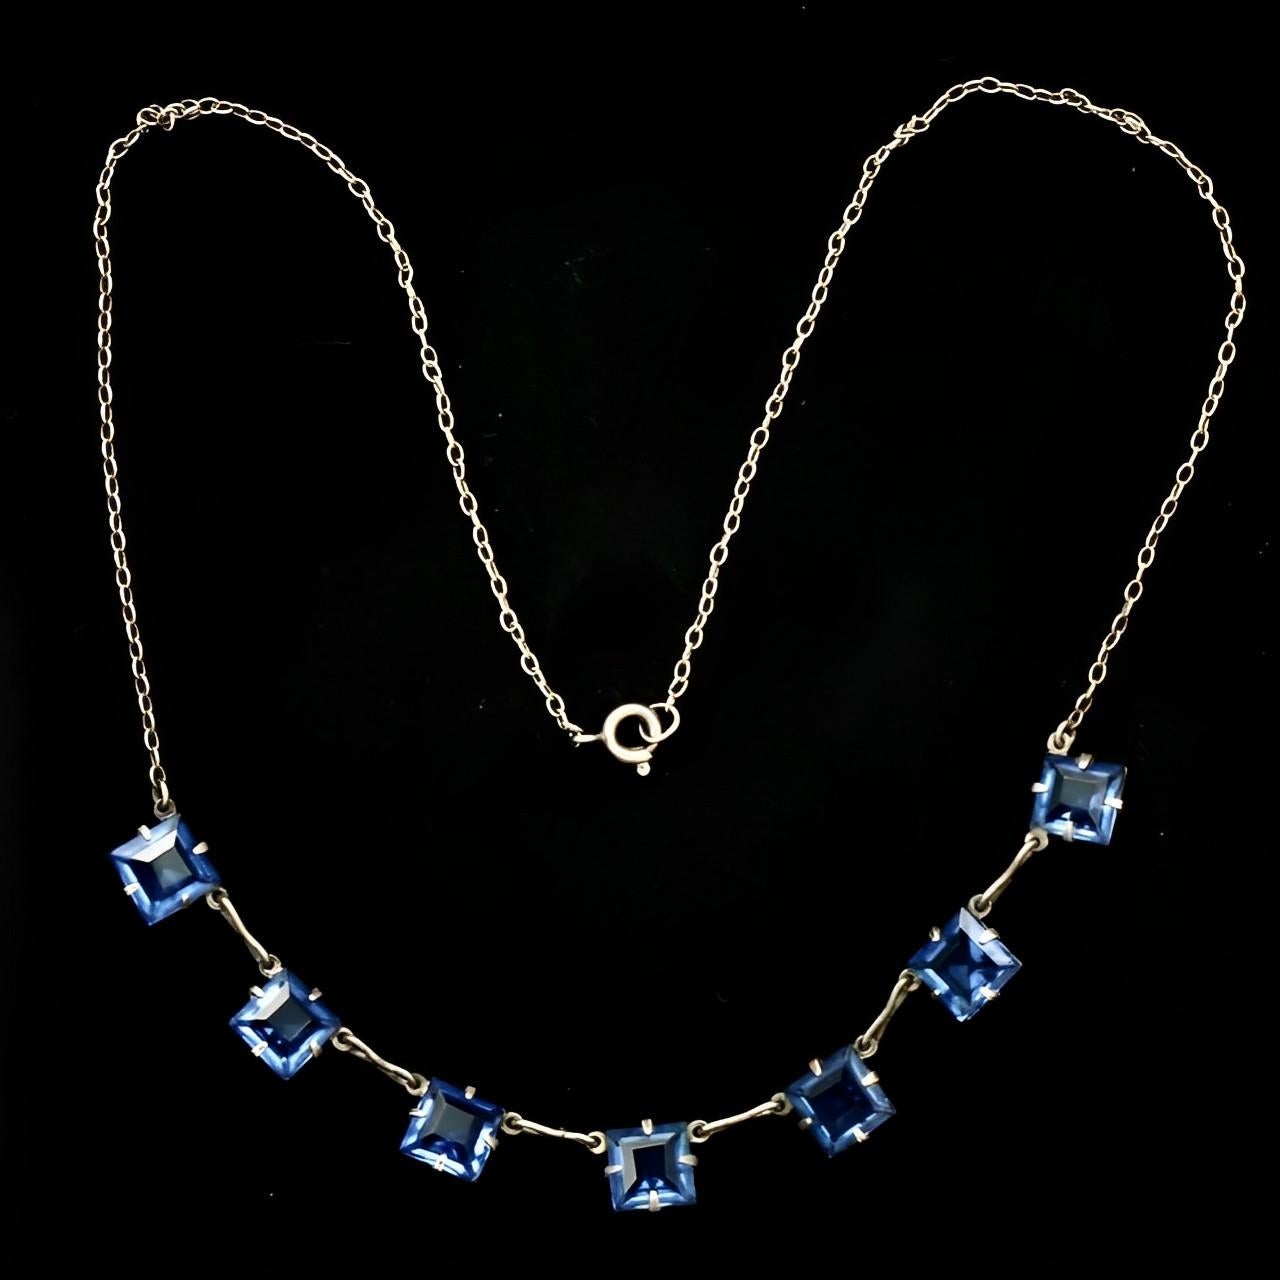 Art Deco Silver Tone Chain Necklace with Square Azure Blue Glass Crystals For Sale 2